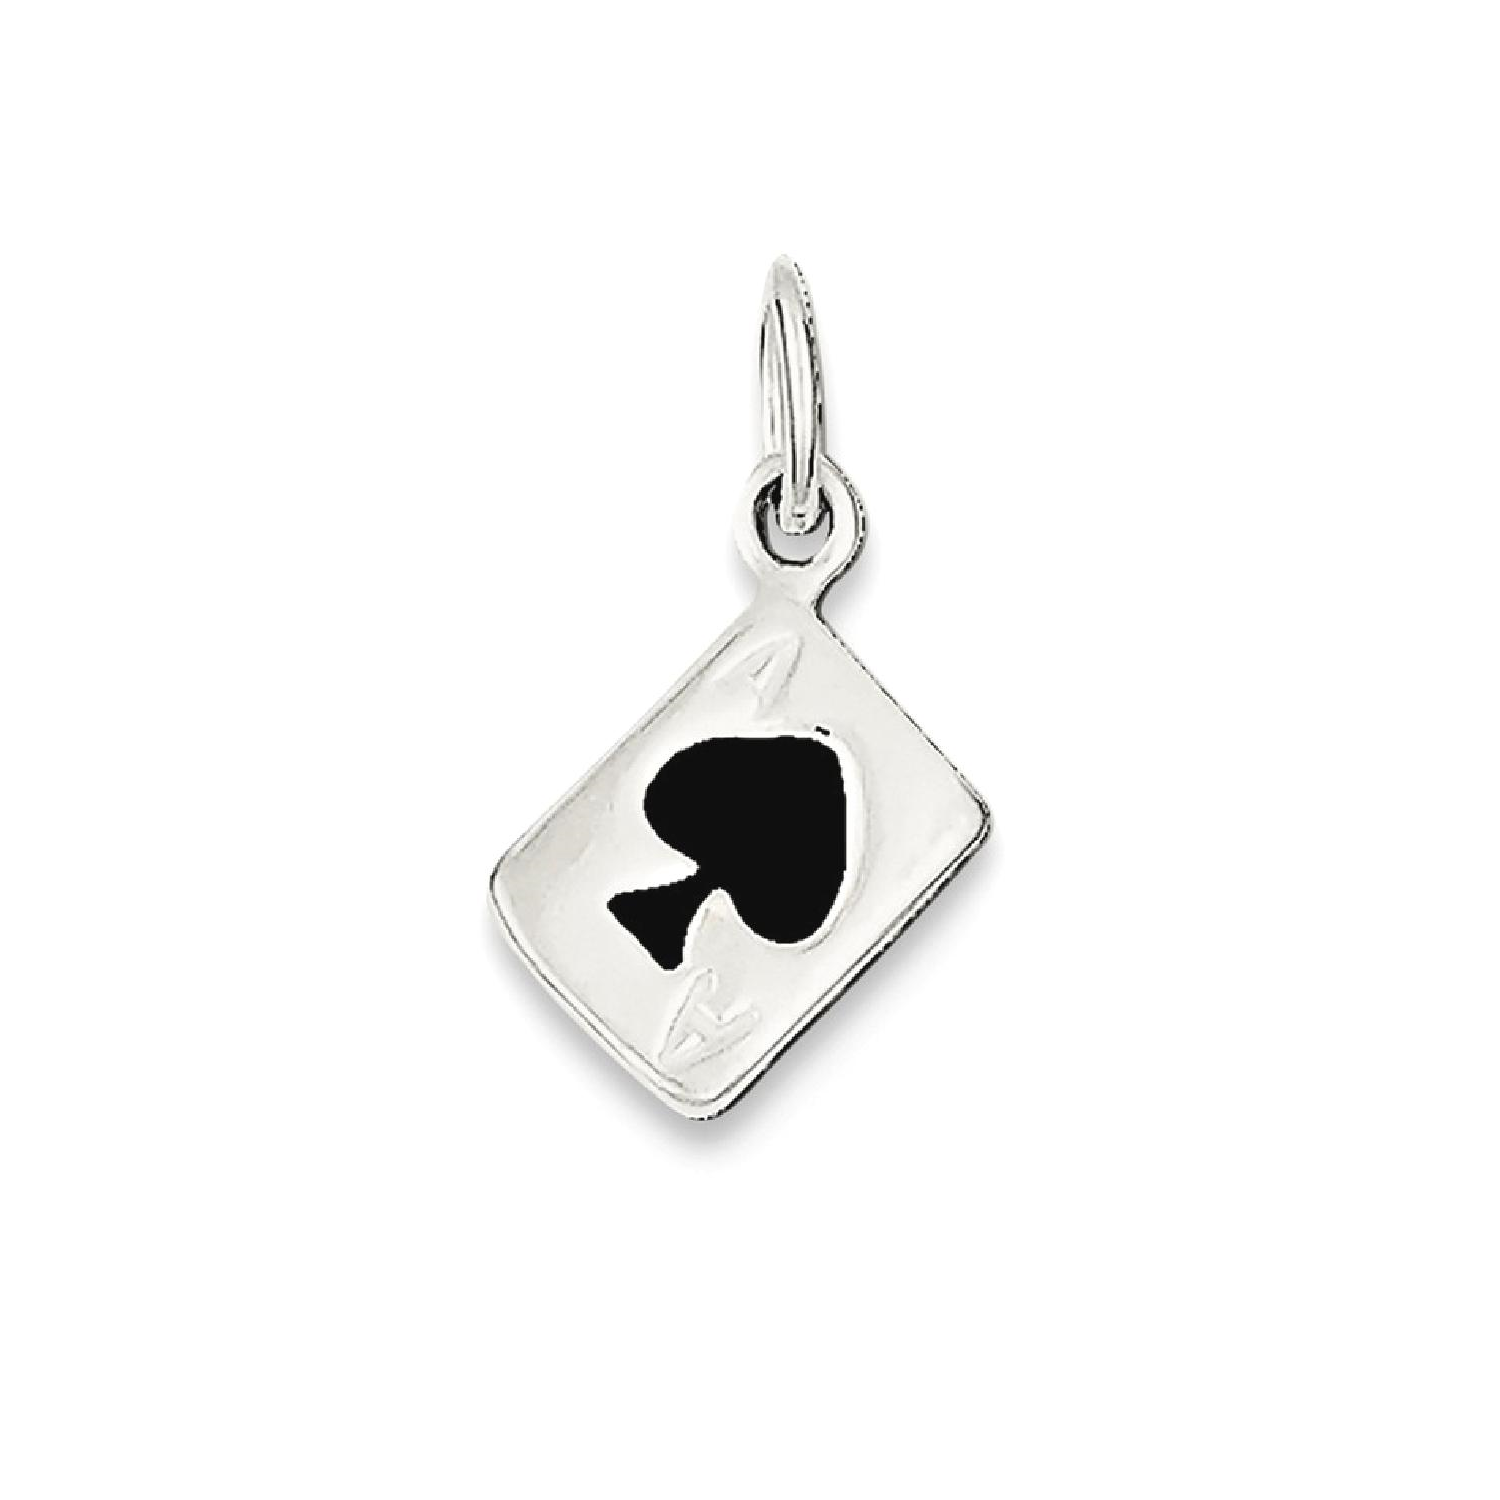 IceCarats 925 Sterling Silver Enameled Ace Of Spades Card Pendant Charm Necklace Gambling